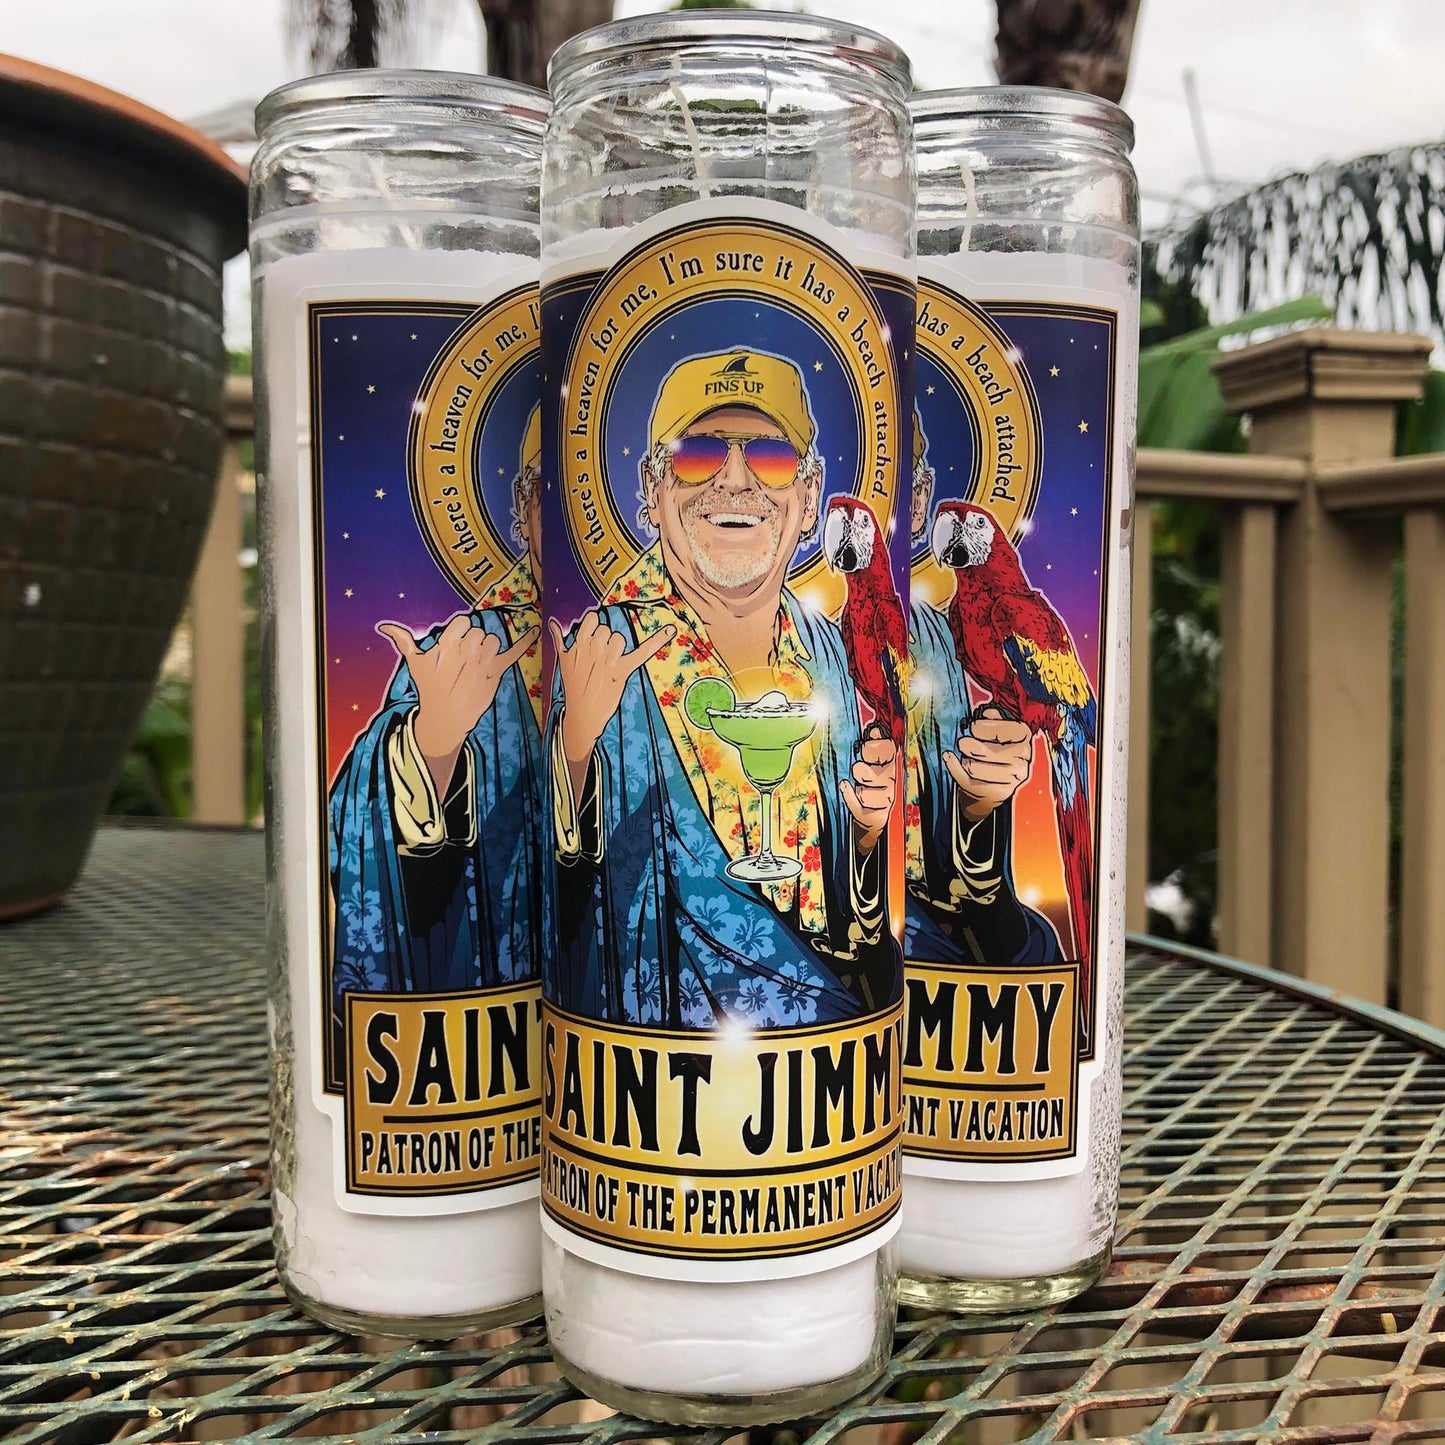 Saint Jimmy Patron of the Permanent Vacation Candle Cleaverandblade.com